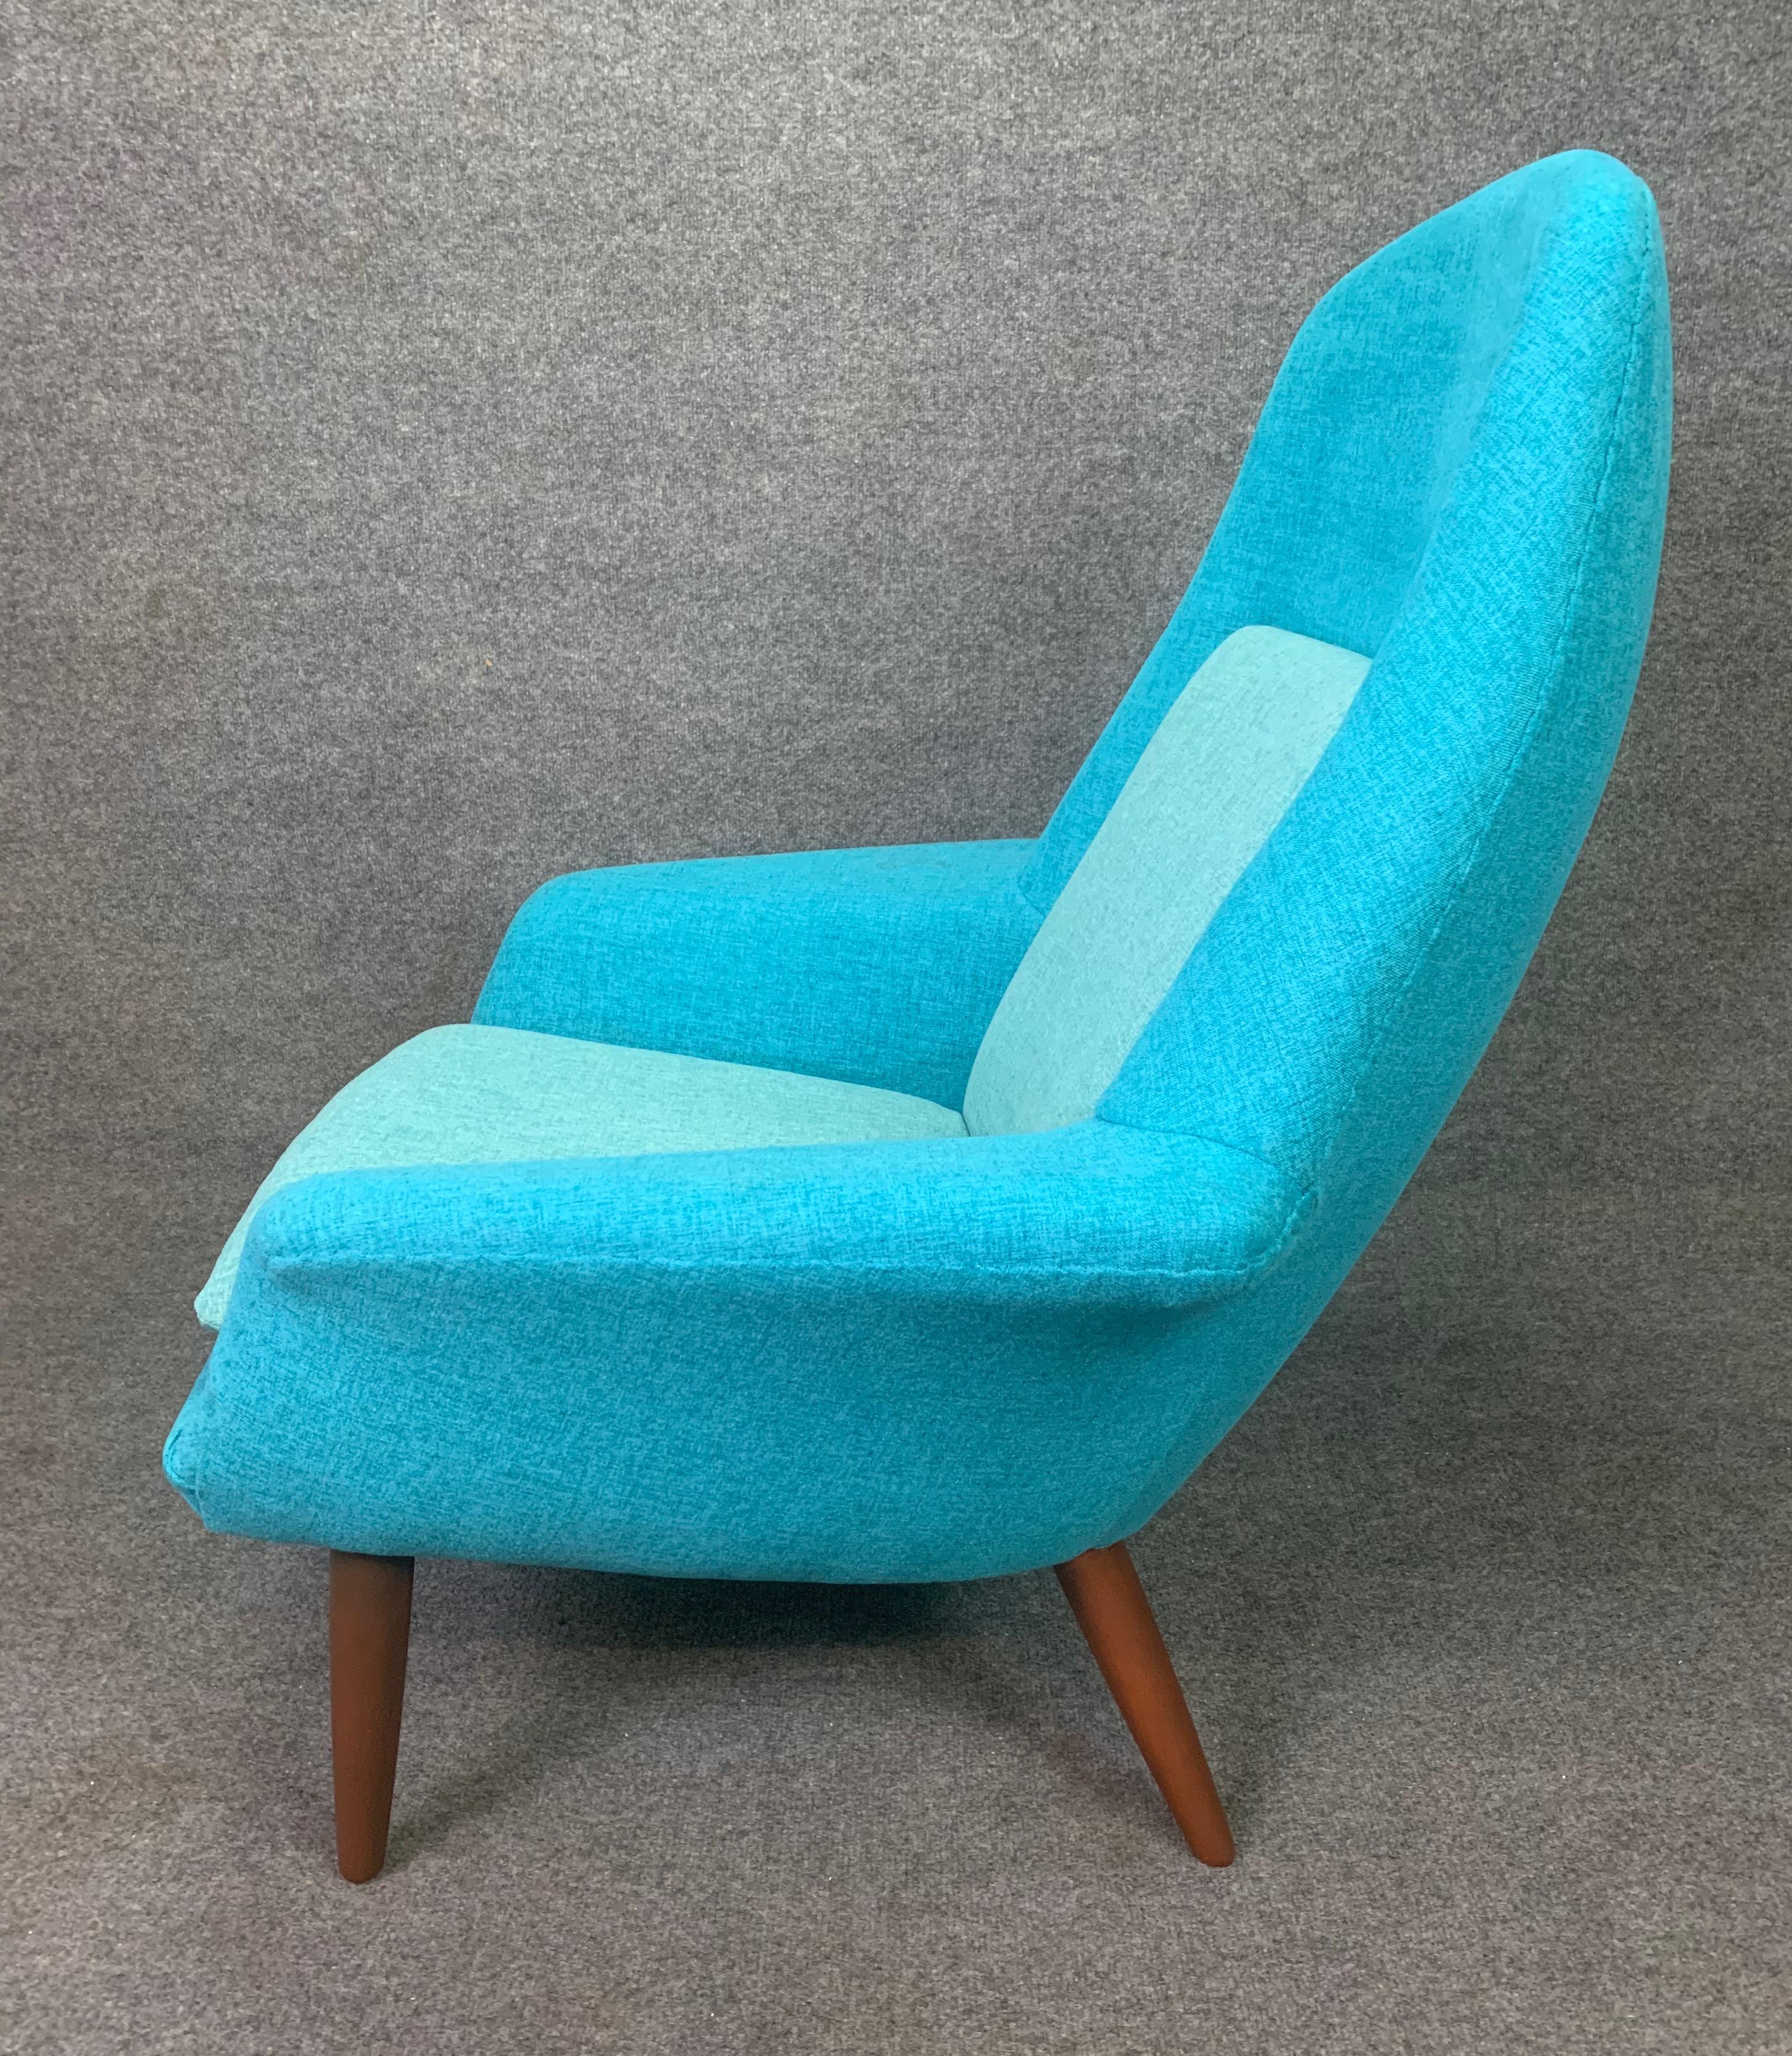 Mid-20th Century Vintage Scandinavian Mid-Century Modern Lounge Chair by Broderna Anderssons For Sale